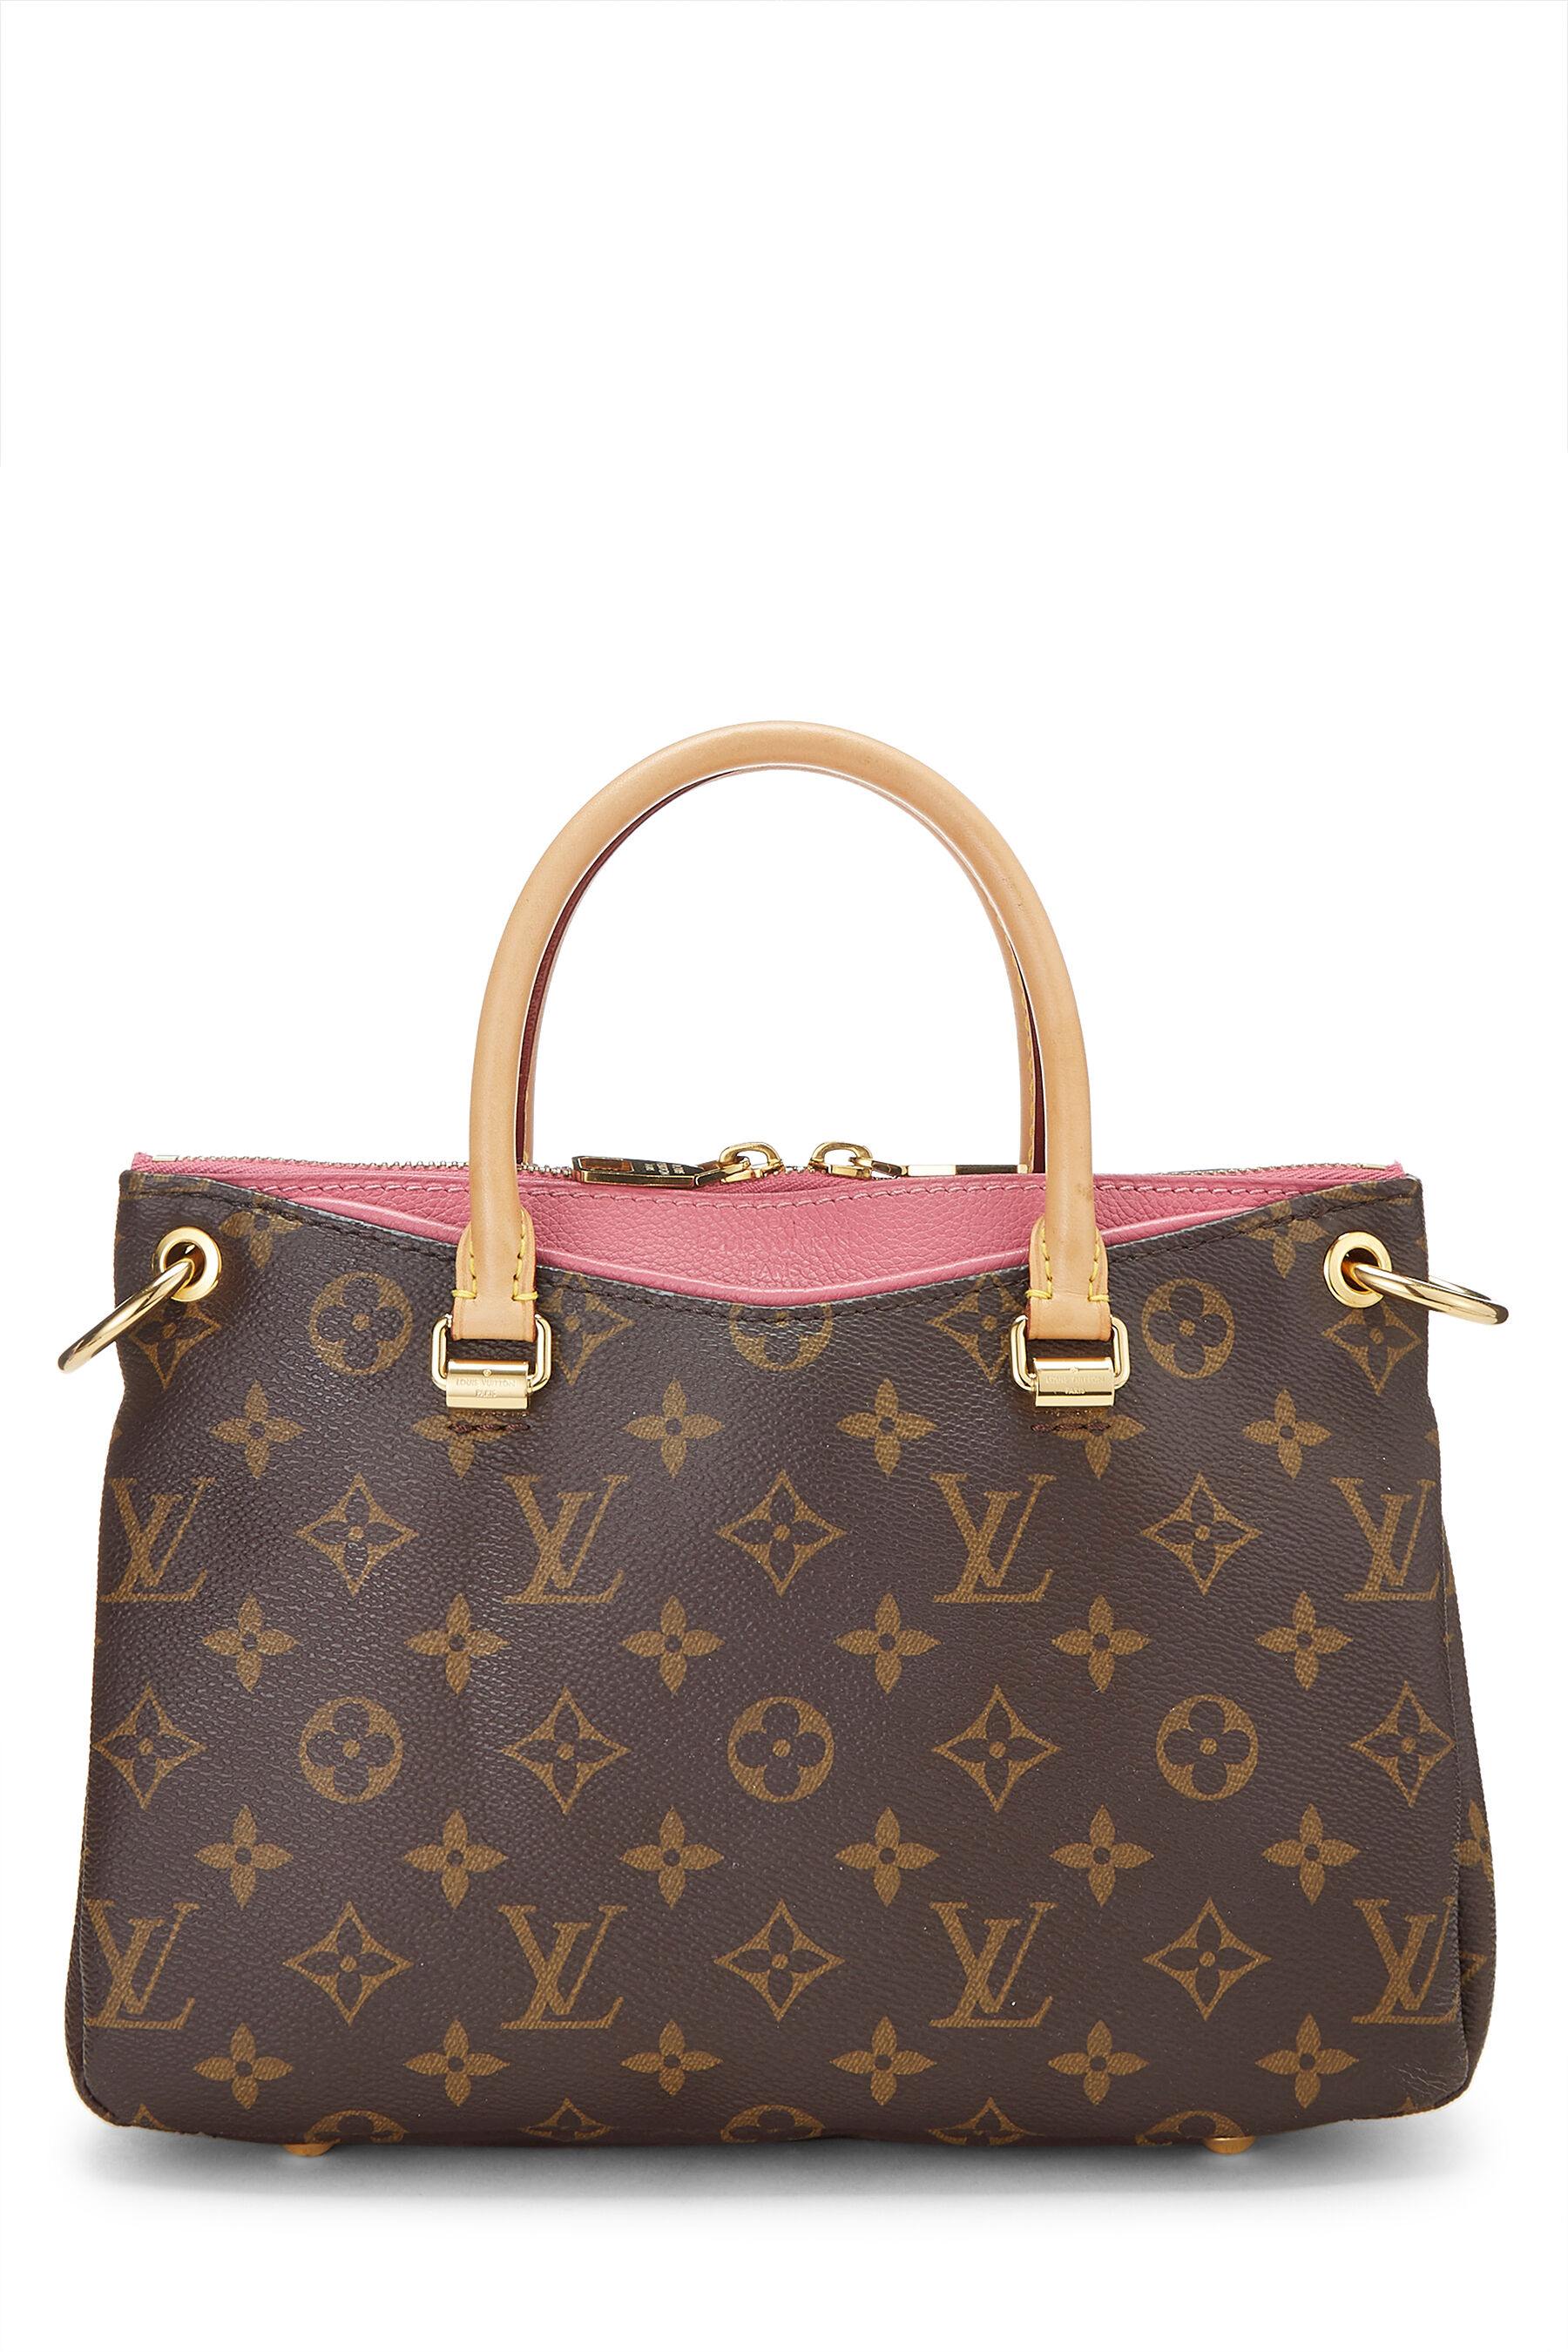 New with tags Louis Vuitton Pallas BB employee bag